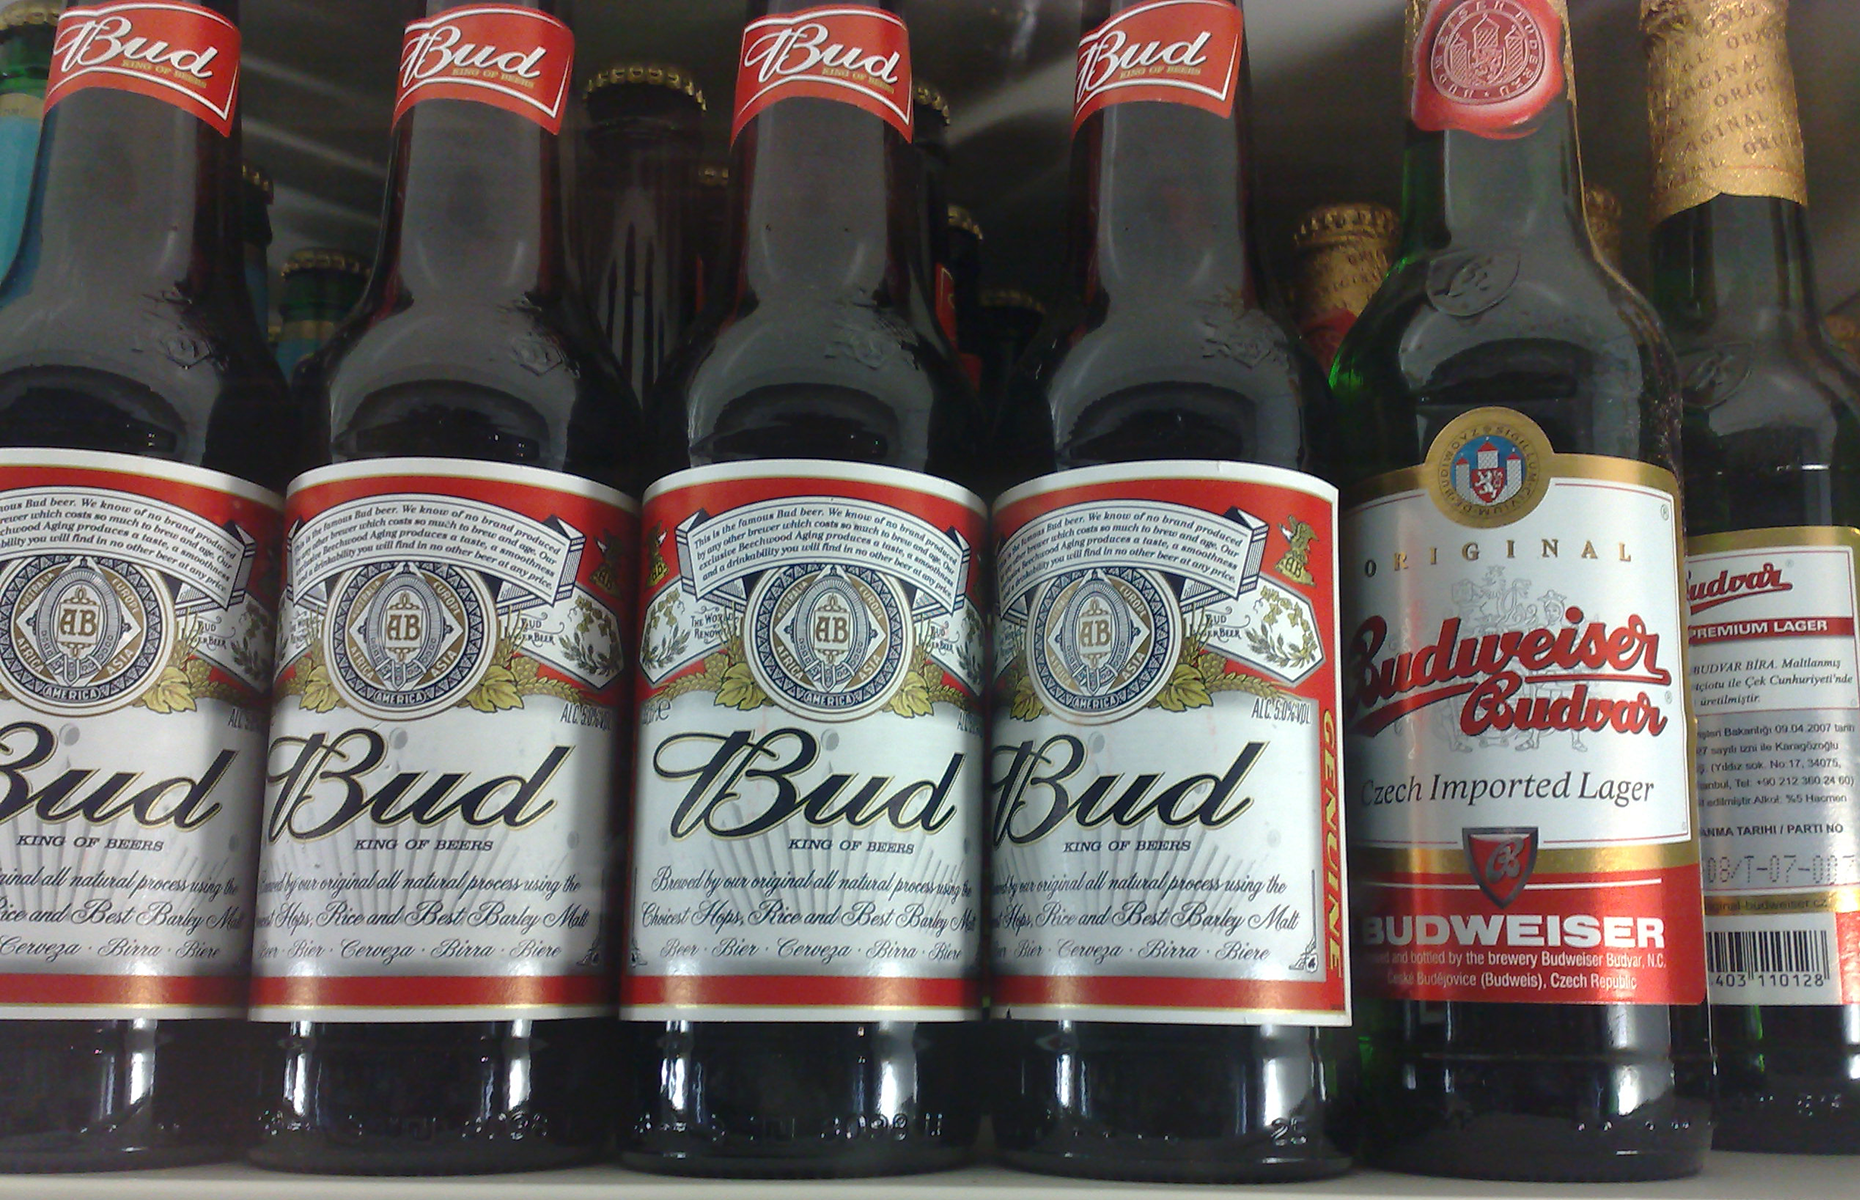 Share a beer with a Bud